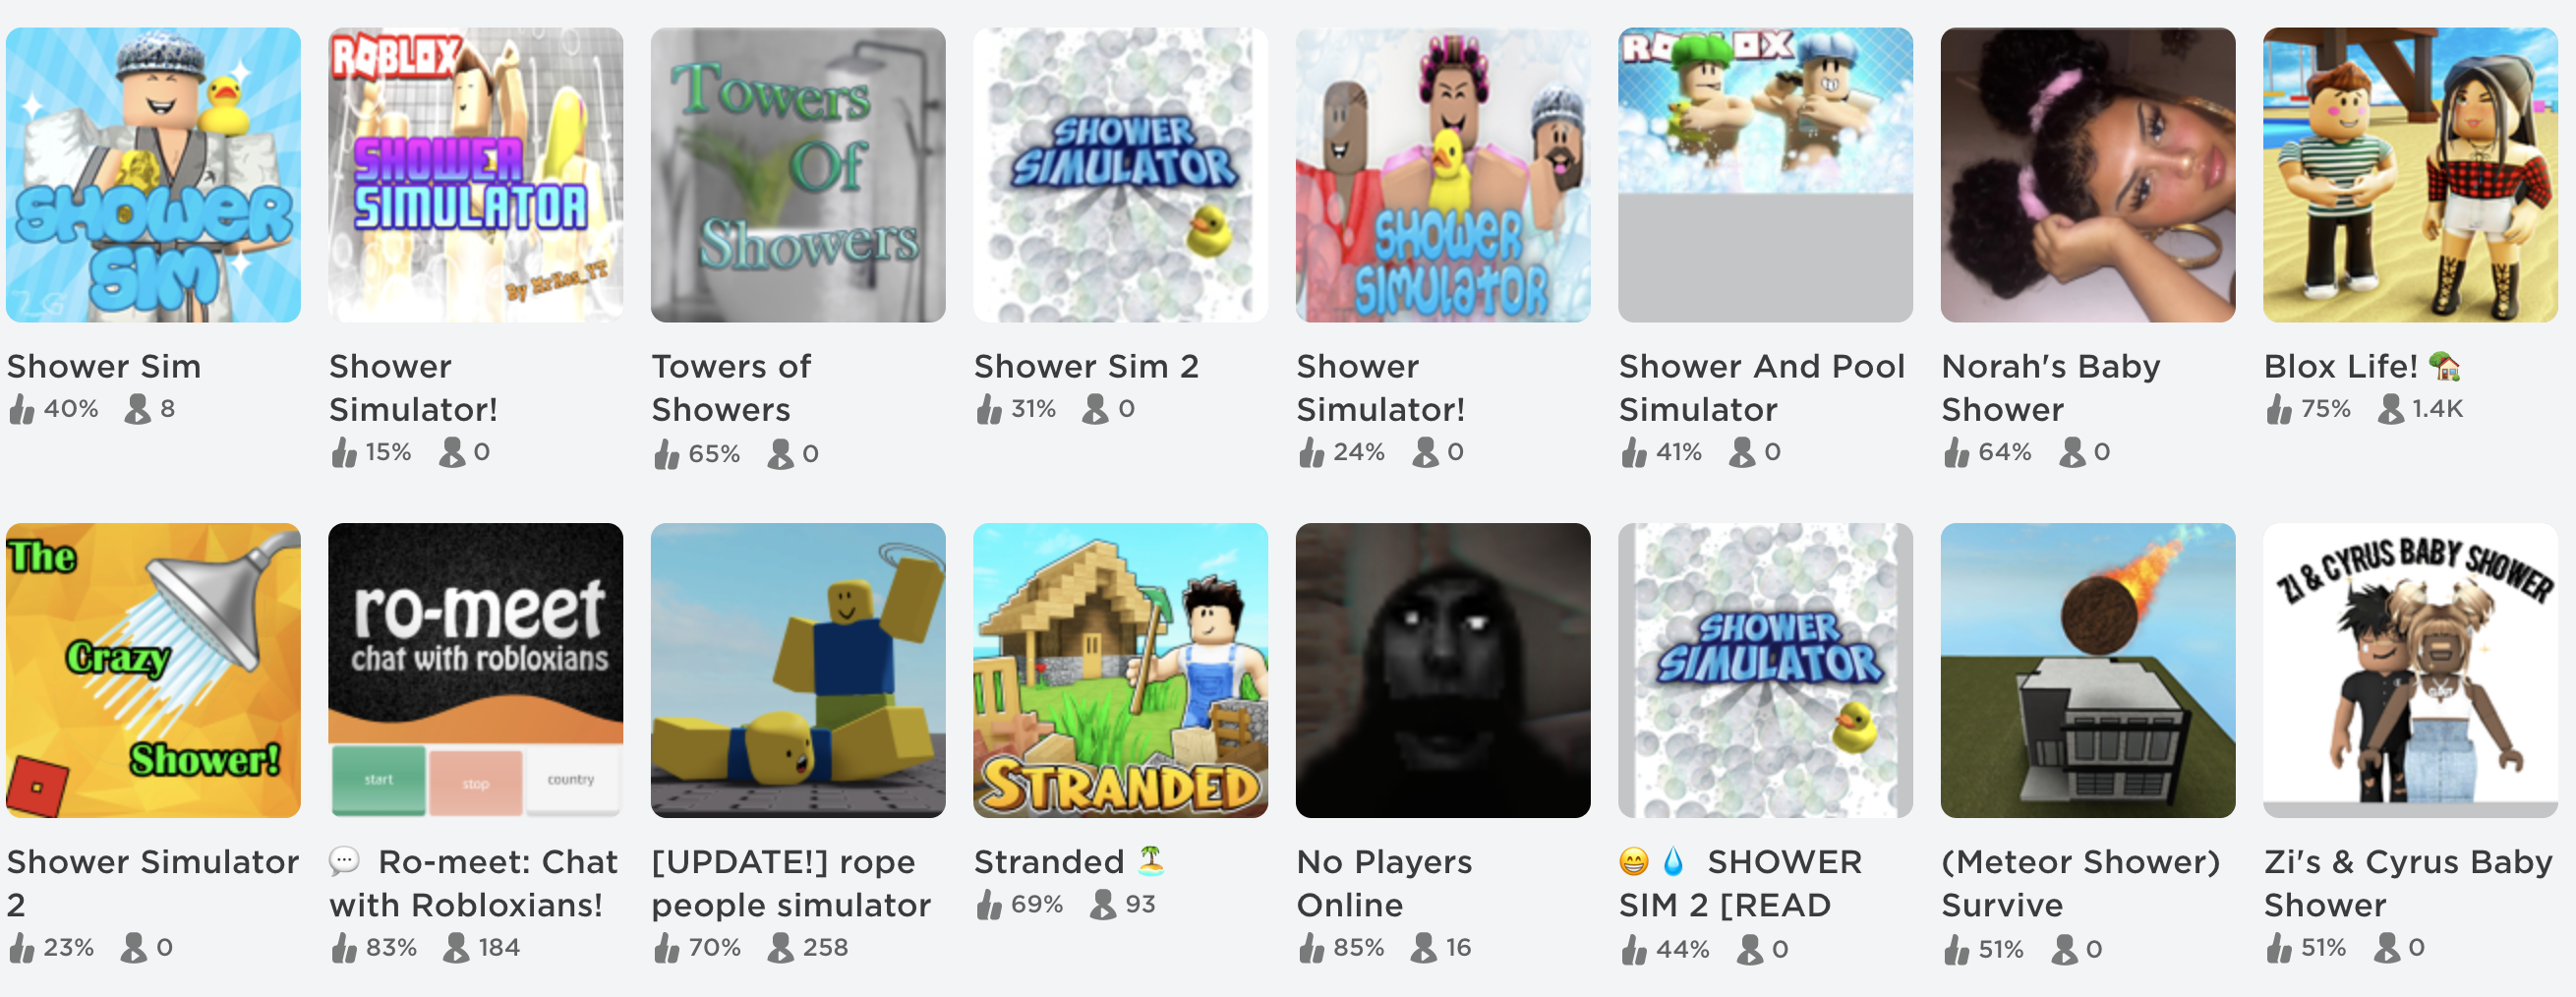 Roblox To Develop Improved Parental Controls As It Struggles With Sexually Explicit Content - roblox game wont update